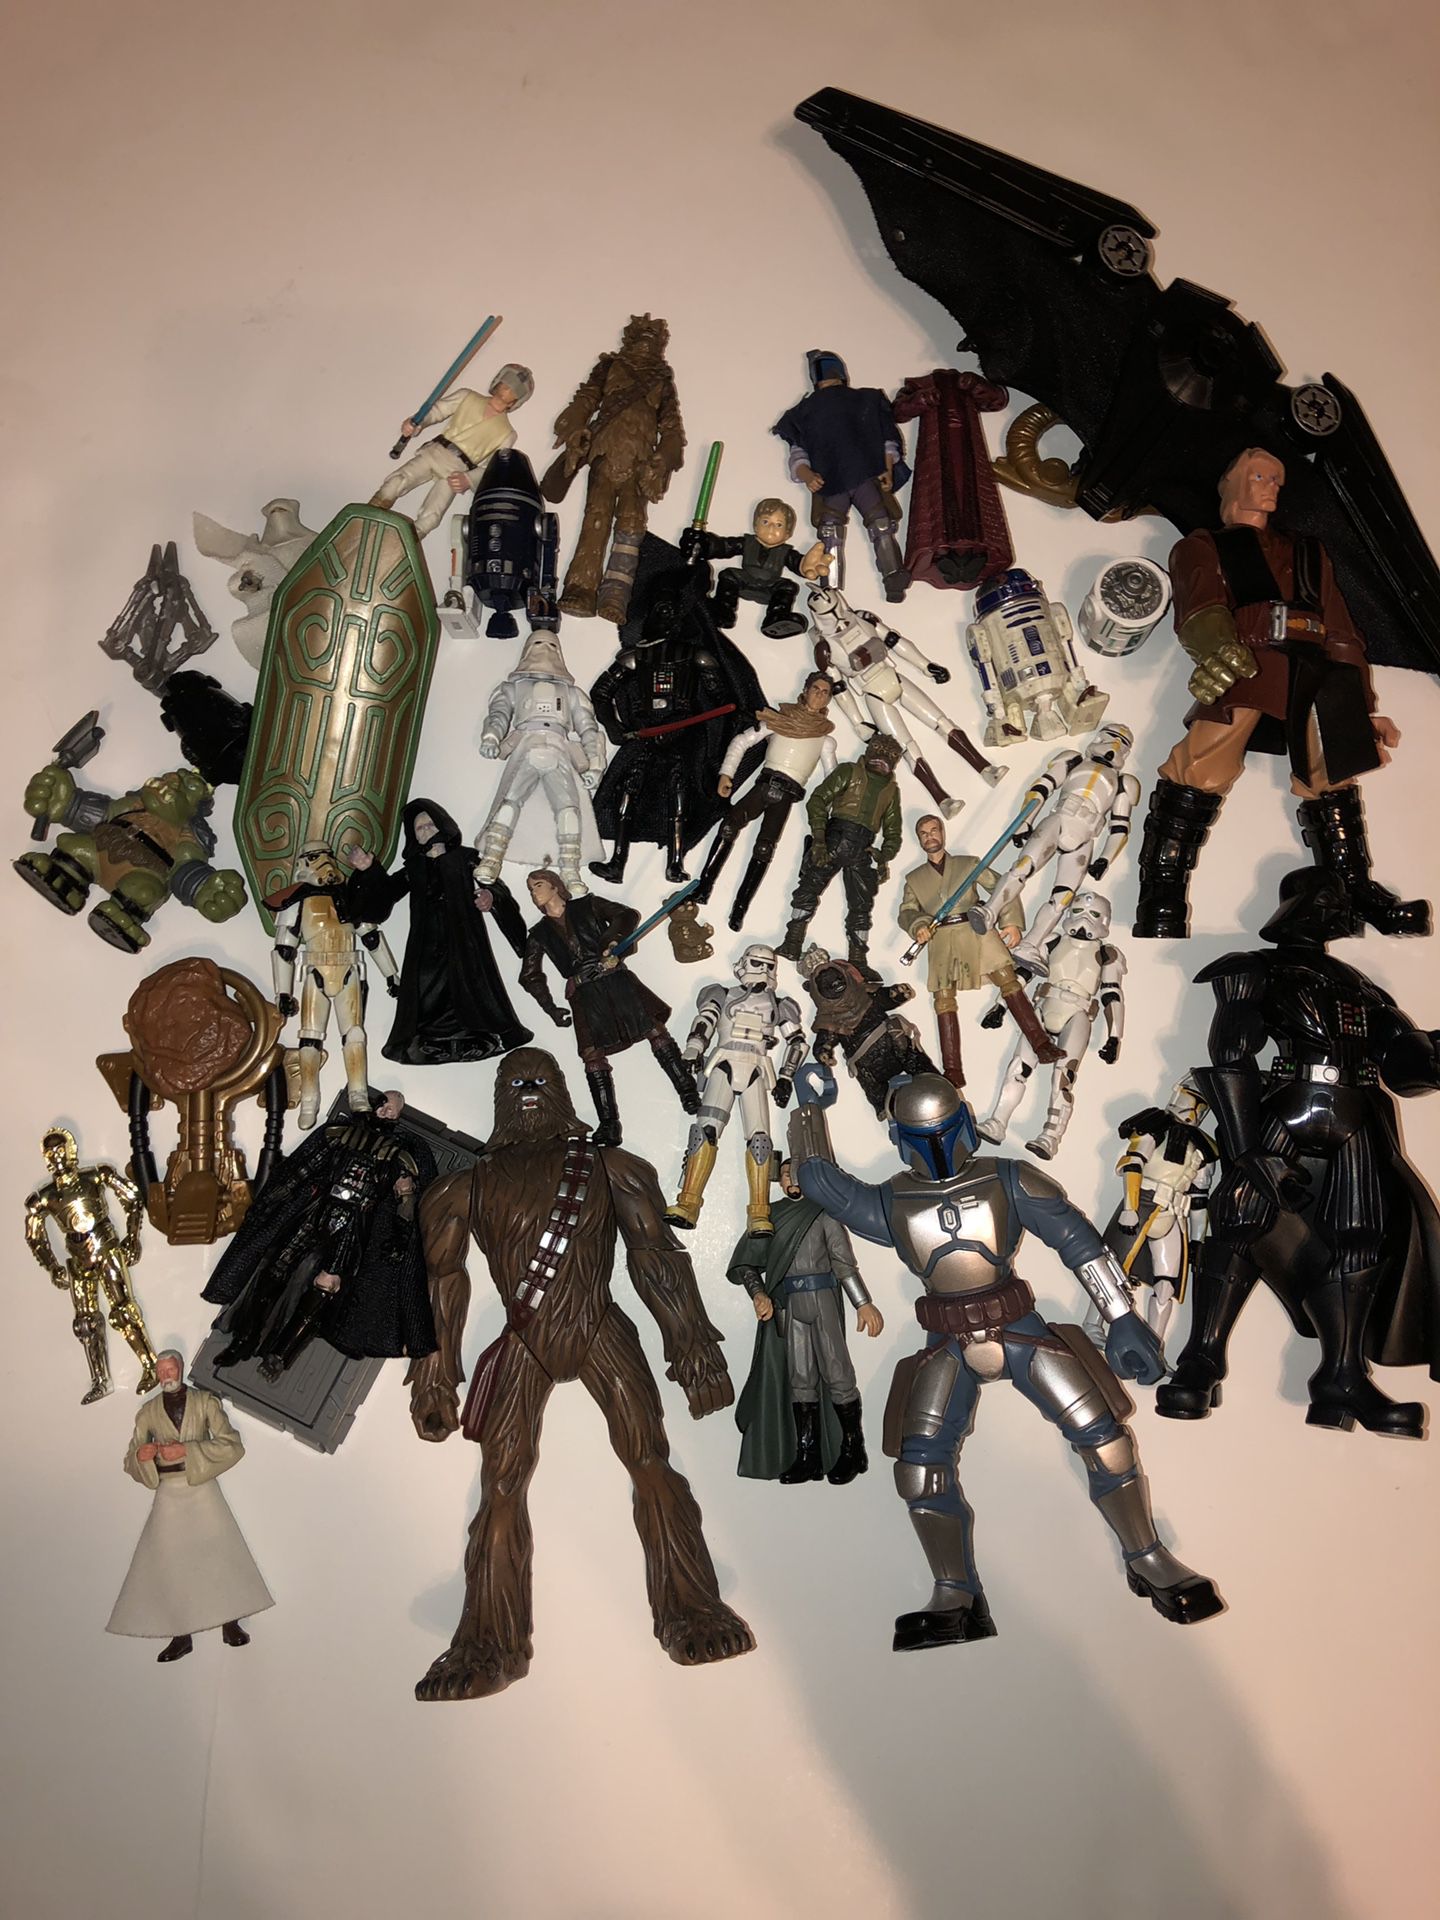 The Star Wars Action Figure Collection